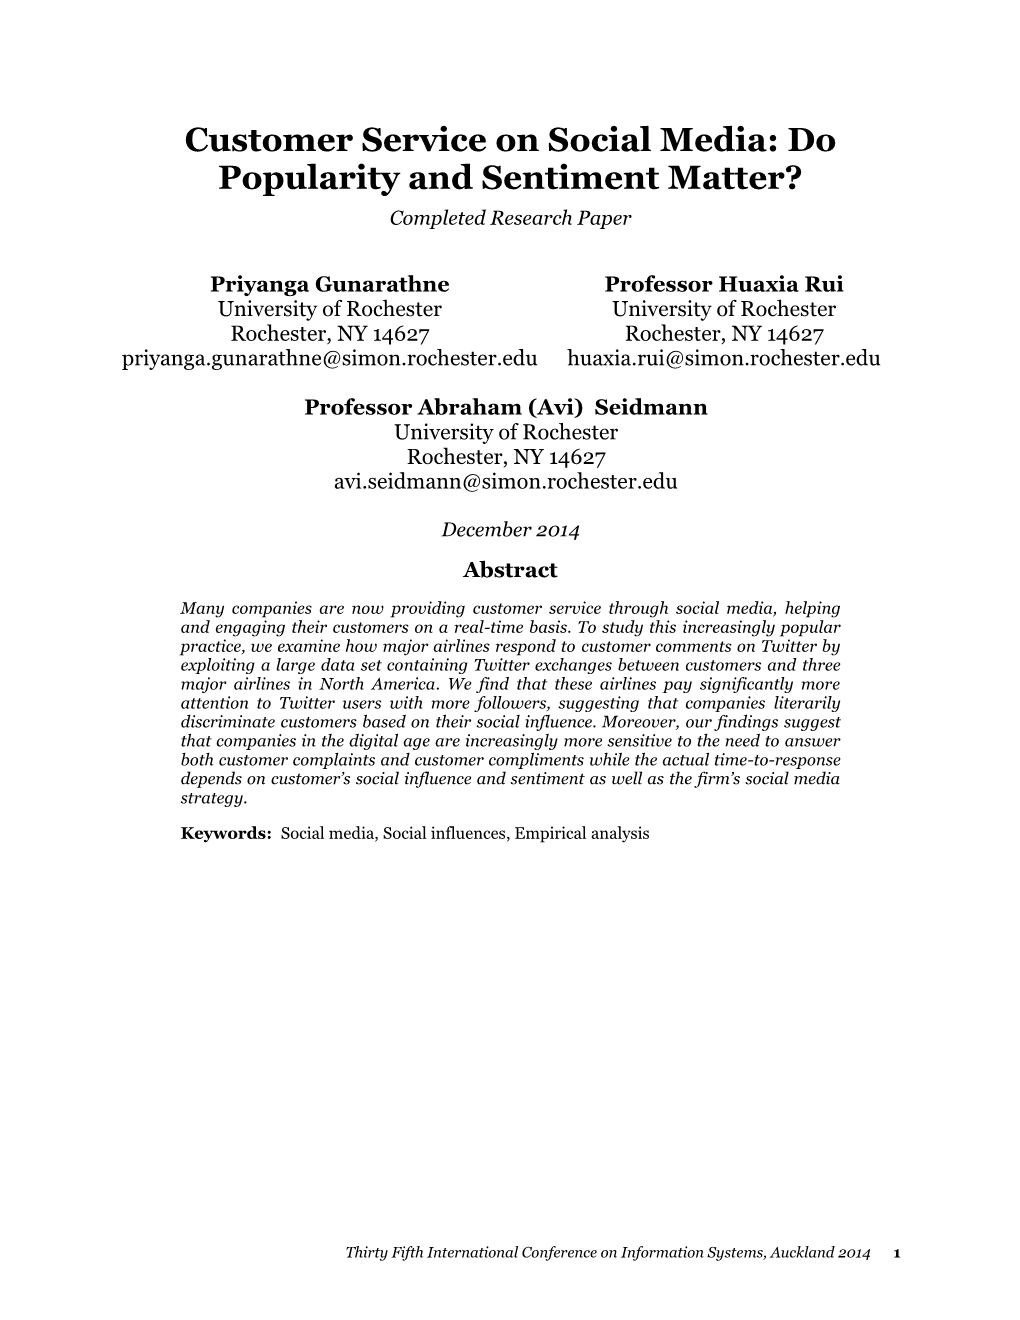 Customer Service on Social Media: Do Popularity and Sentiment Matter? Completed Research Paper